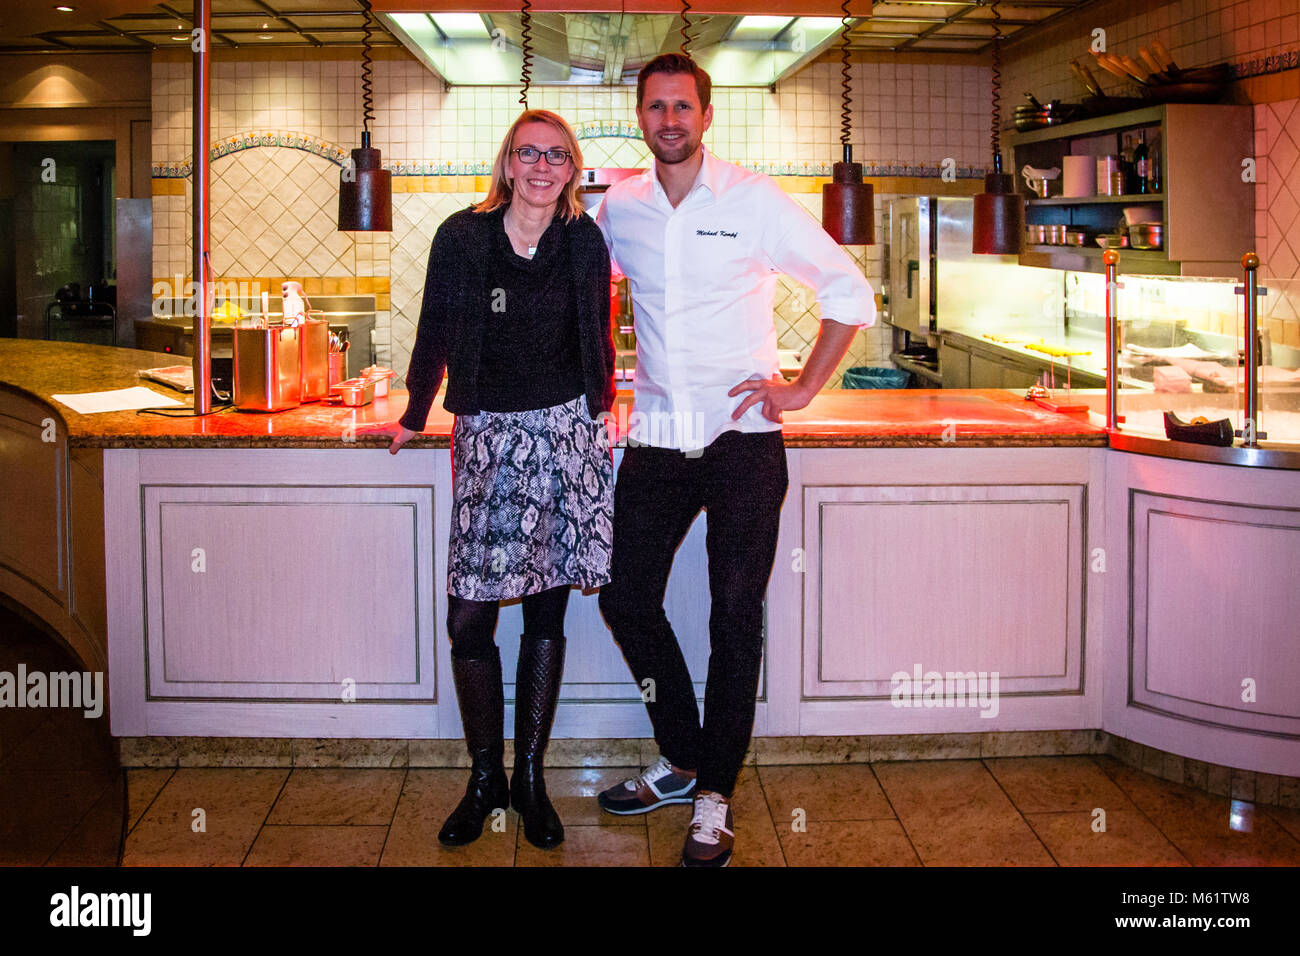 German Michelin star chef Michael Kempf together with reporter Angela Berg in front of the open kitchen at Parkhotel Ahrensburg, Germany Stock Photo